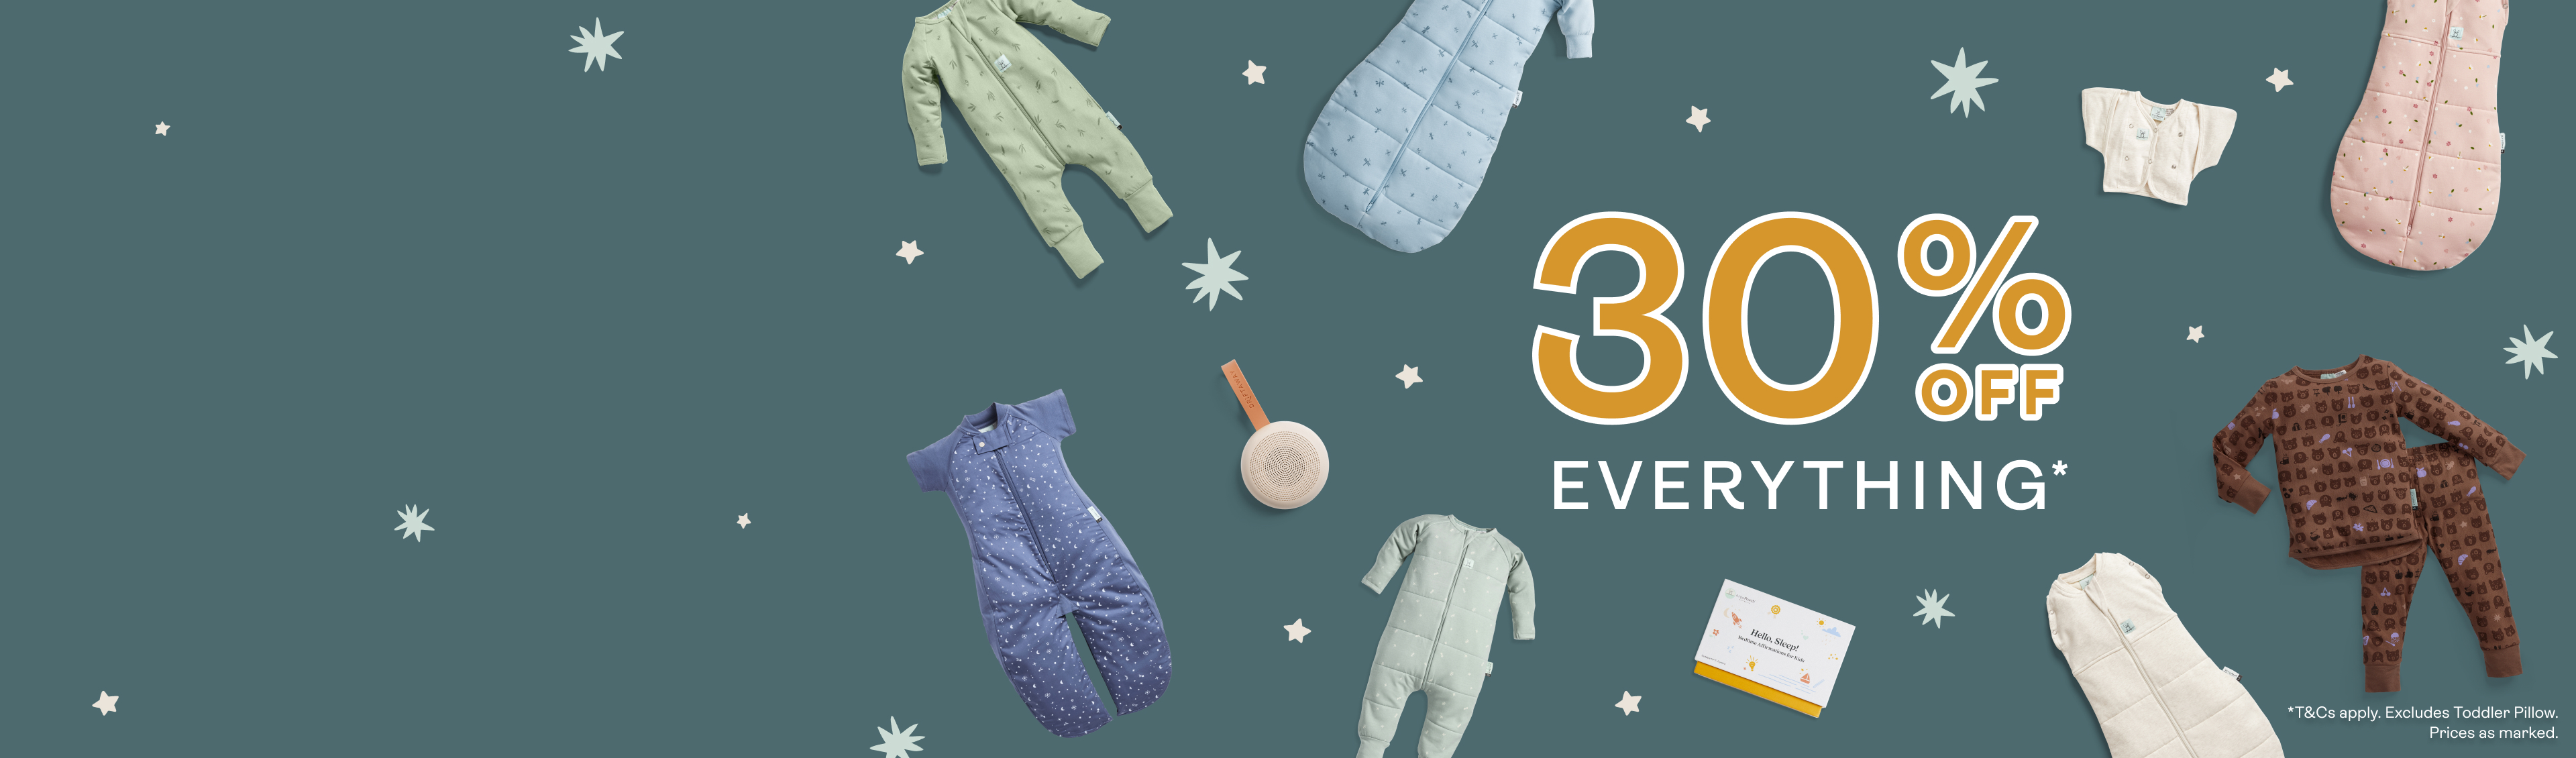 Mid Season Sale is here! Save 30% and stock up on all your favourite Swaddle Sacks, Sleep Sacks, Sleep Suits, Rompers and more. 